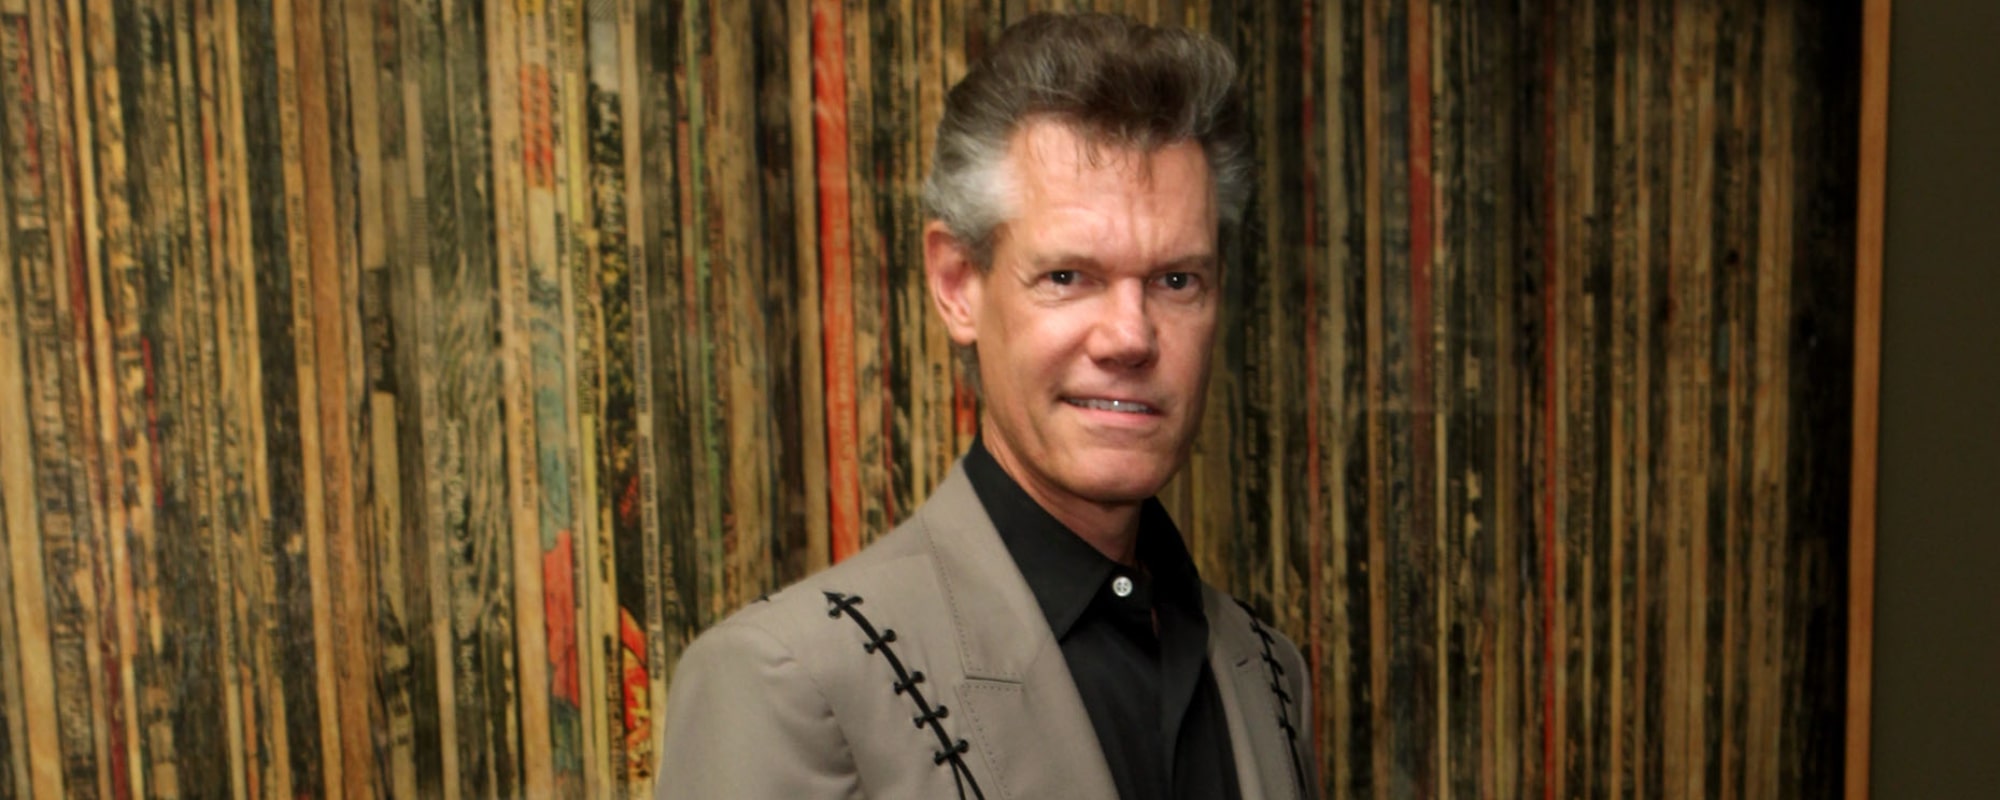 Randy Travis Releases “Where That Came From” Music Video Featuring Cole Swindell, Carrie Underwood, Clay Walker, and Others